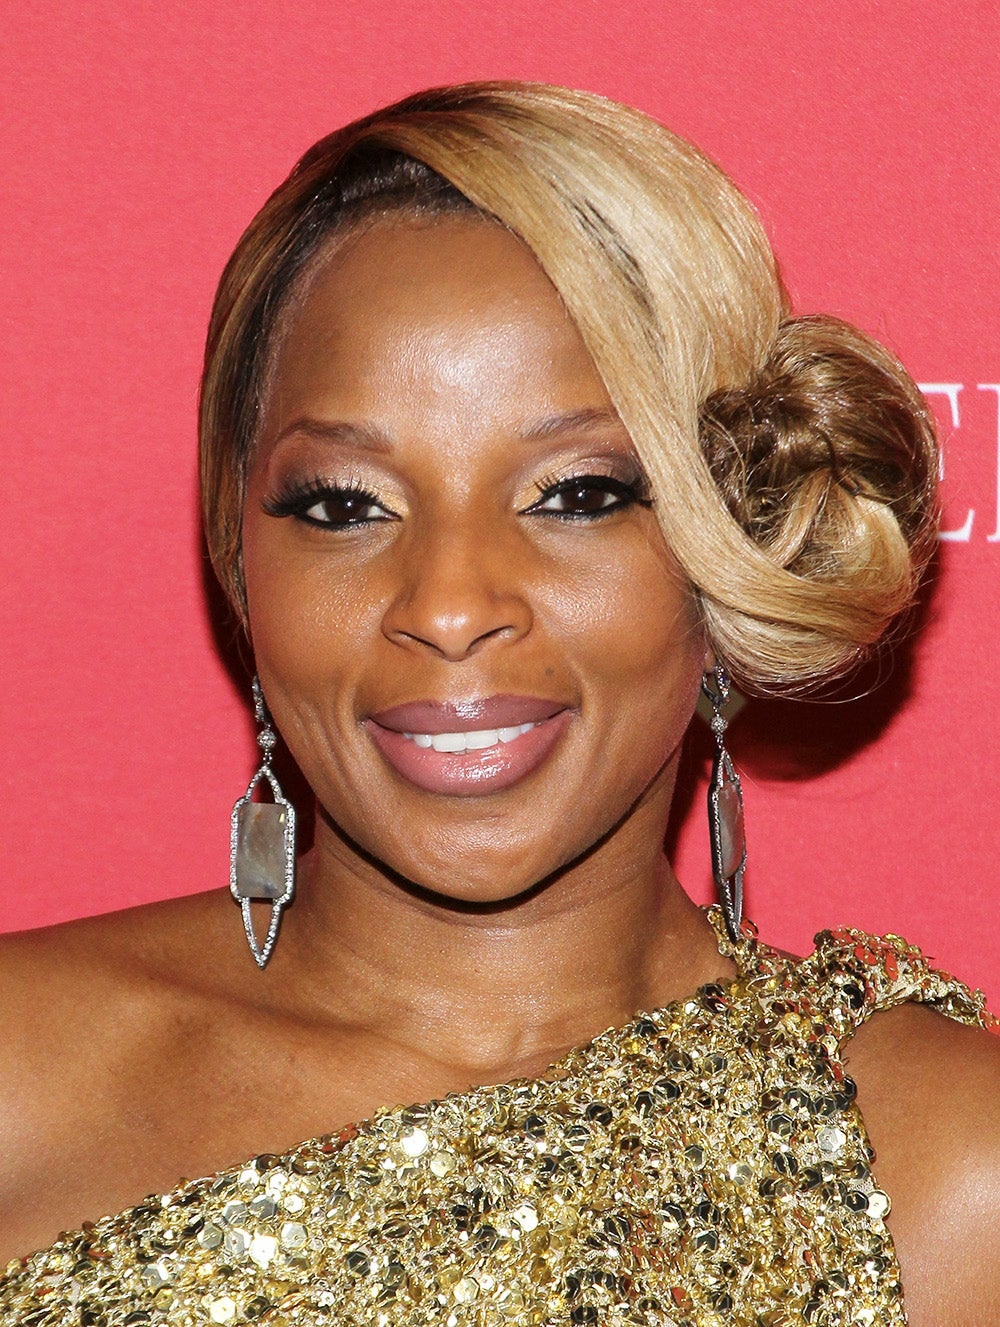 Mary J. Blige's Hillary Clinton Interview Clip Is A Reminder Of Her Most Epic Hair Moments
